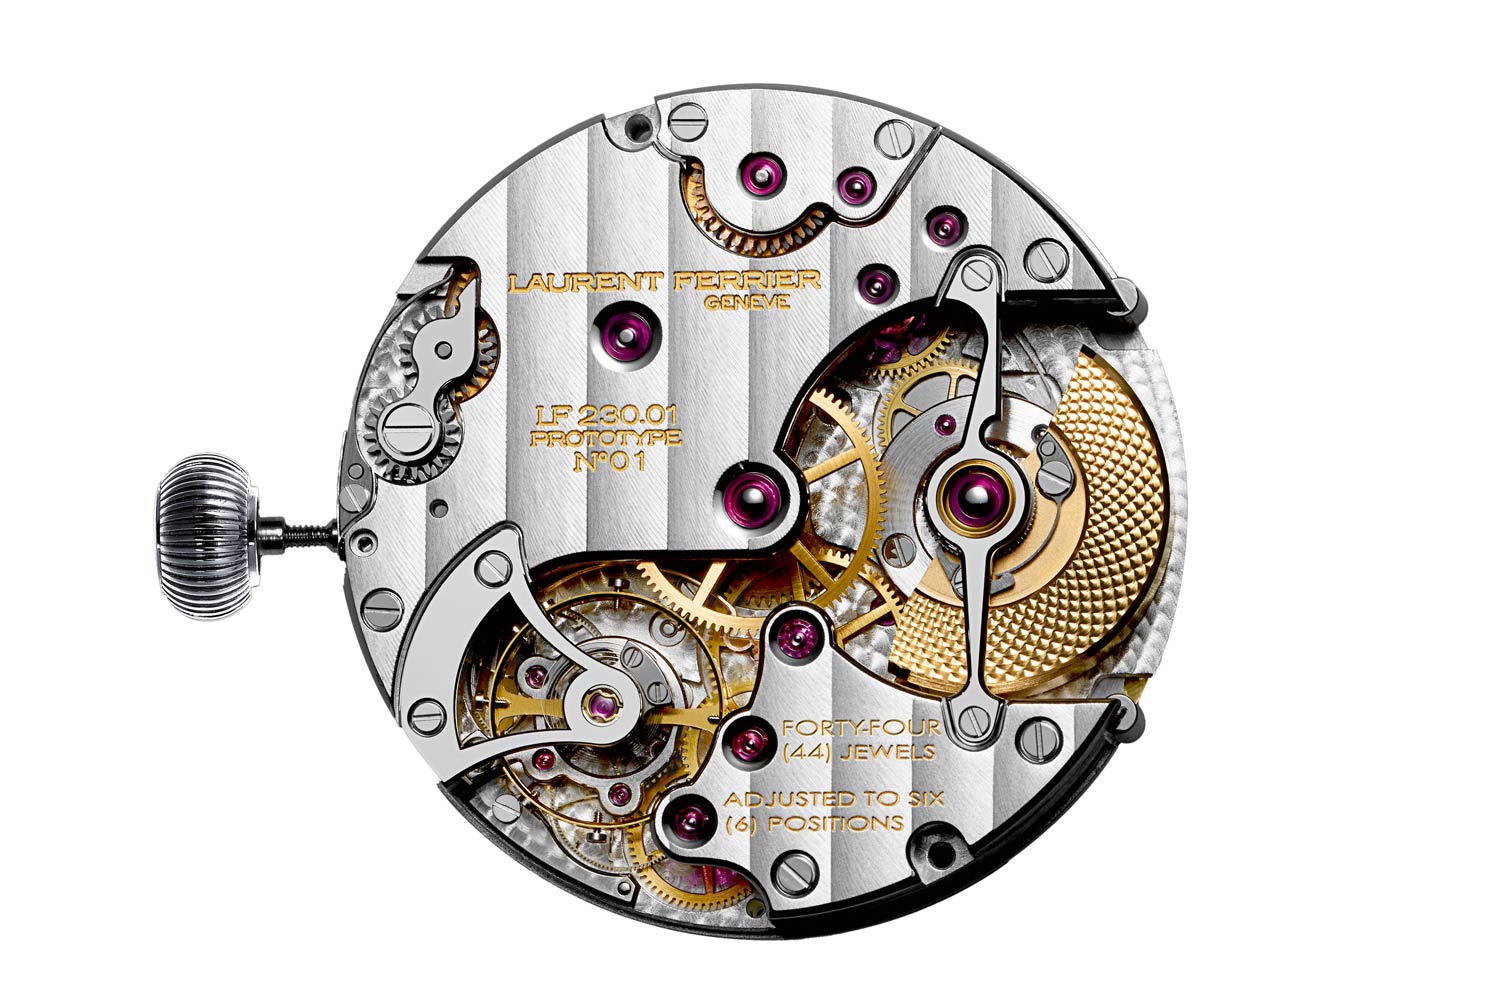 The self-winding FBN 229.01 calibre with micro-rotor and natural escapement.